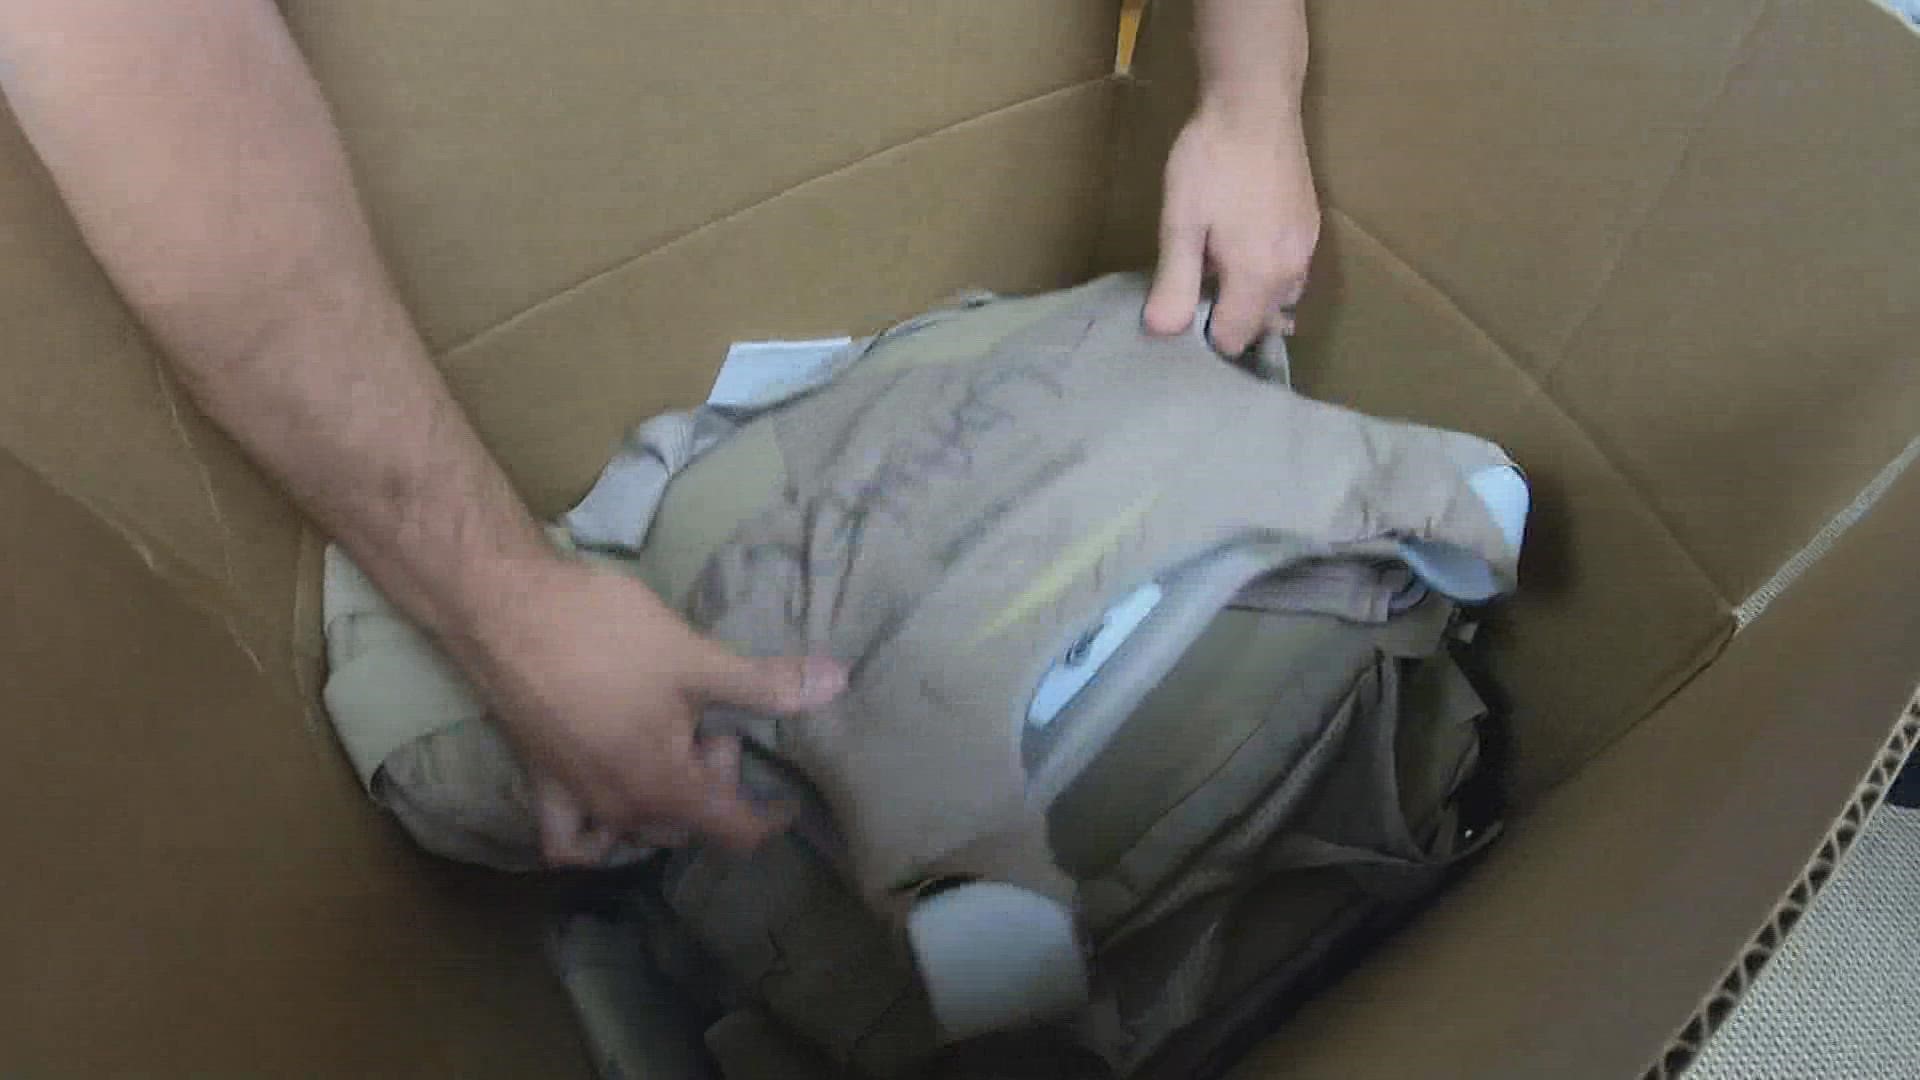 The Fort Bend County Sheriff's Office is donating body armor to help first responders in Ukraine.